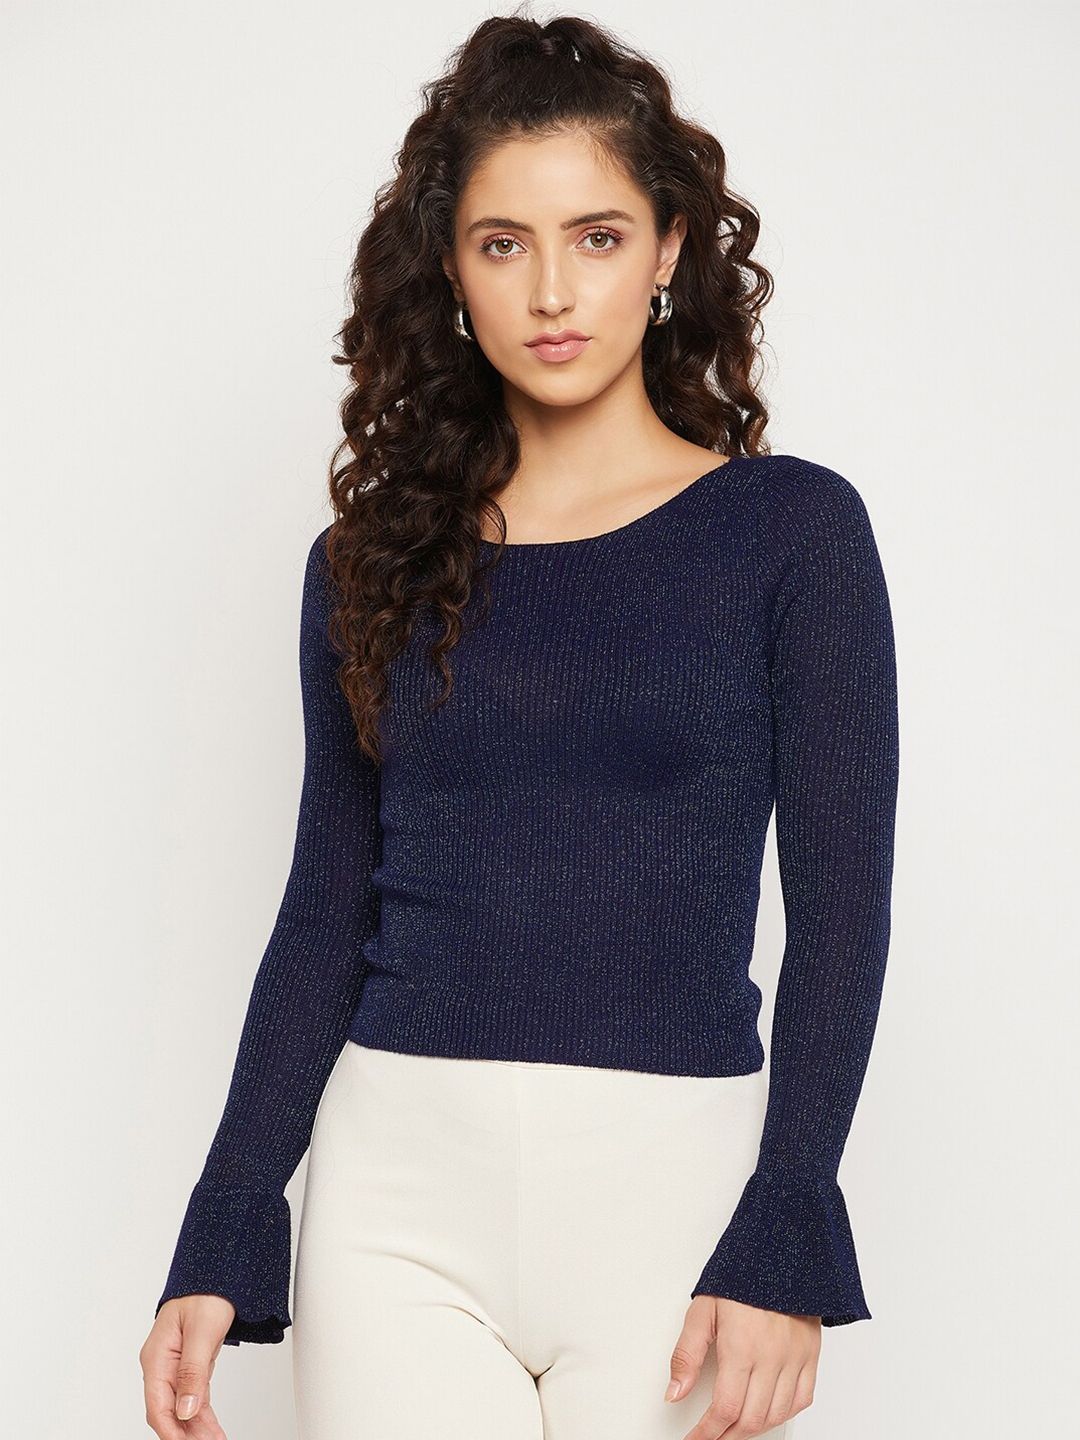 Madame Woman Navy Blue Bell Sleeves Top Price in India